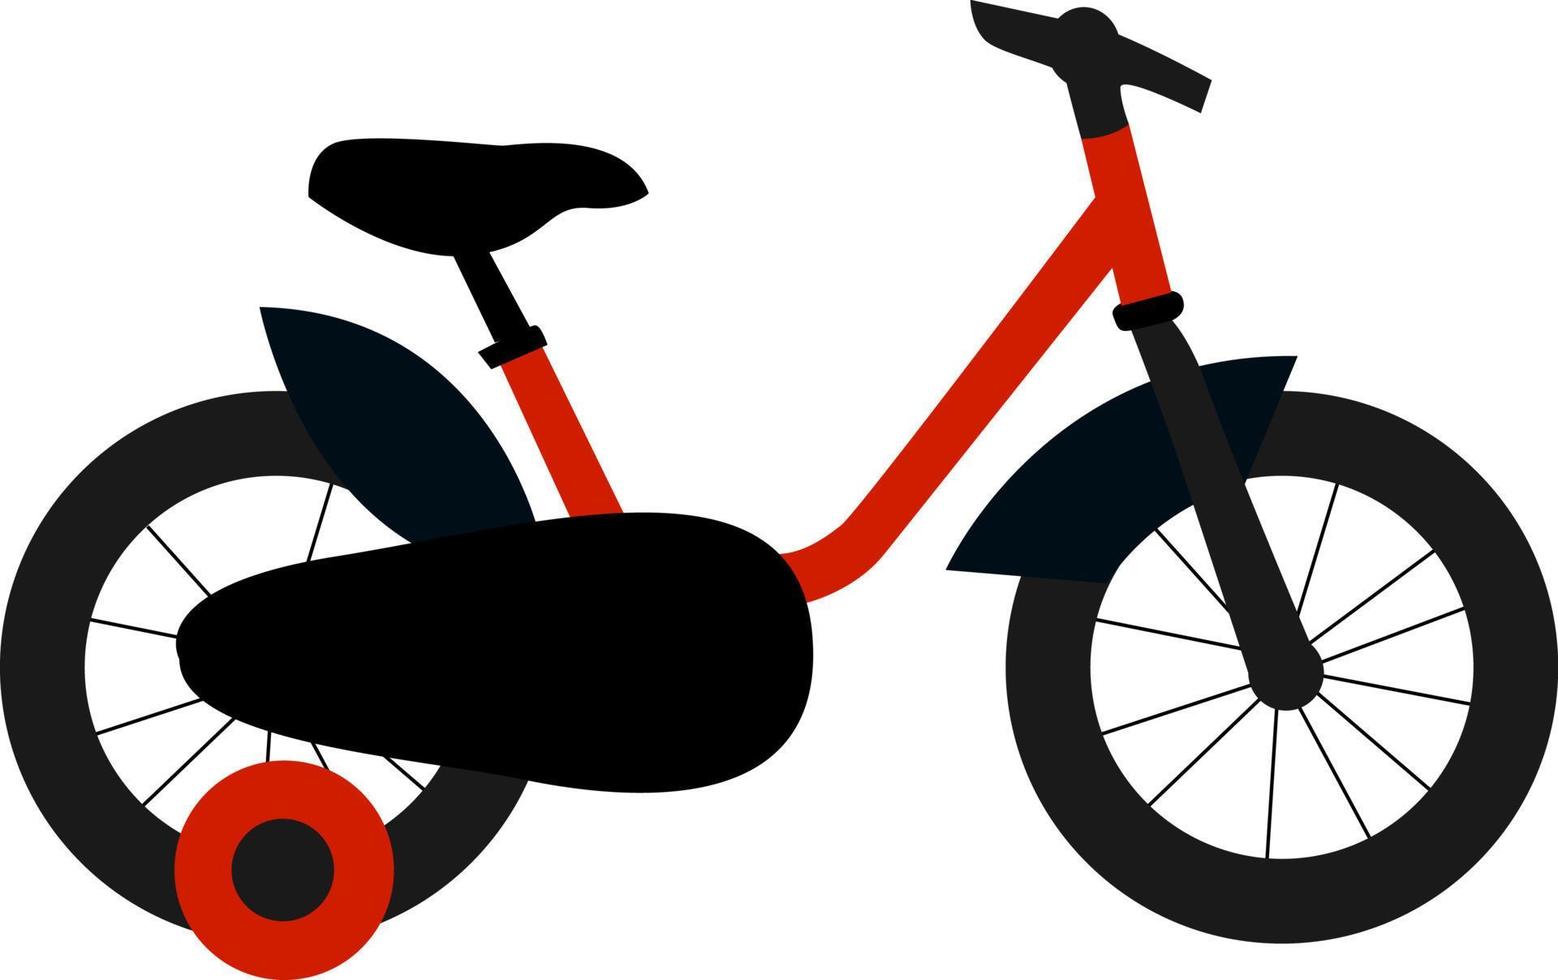 Little bicycle, illustration, vector on white background.